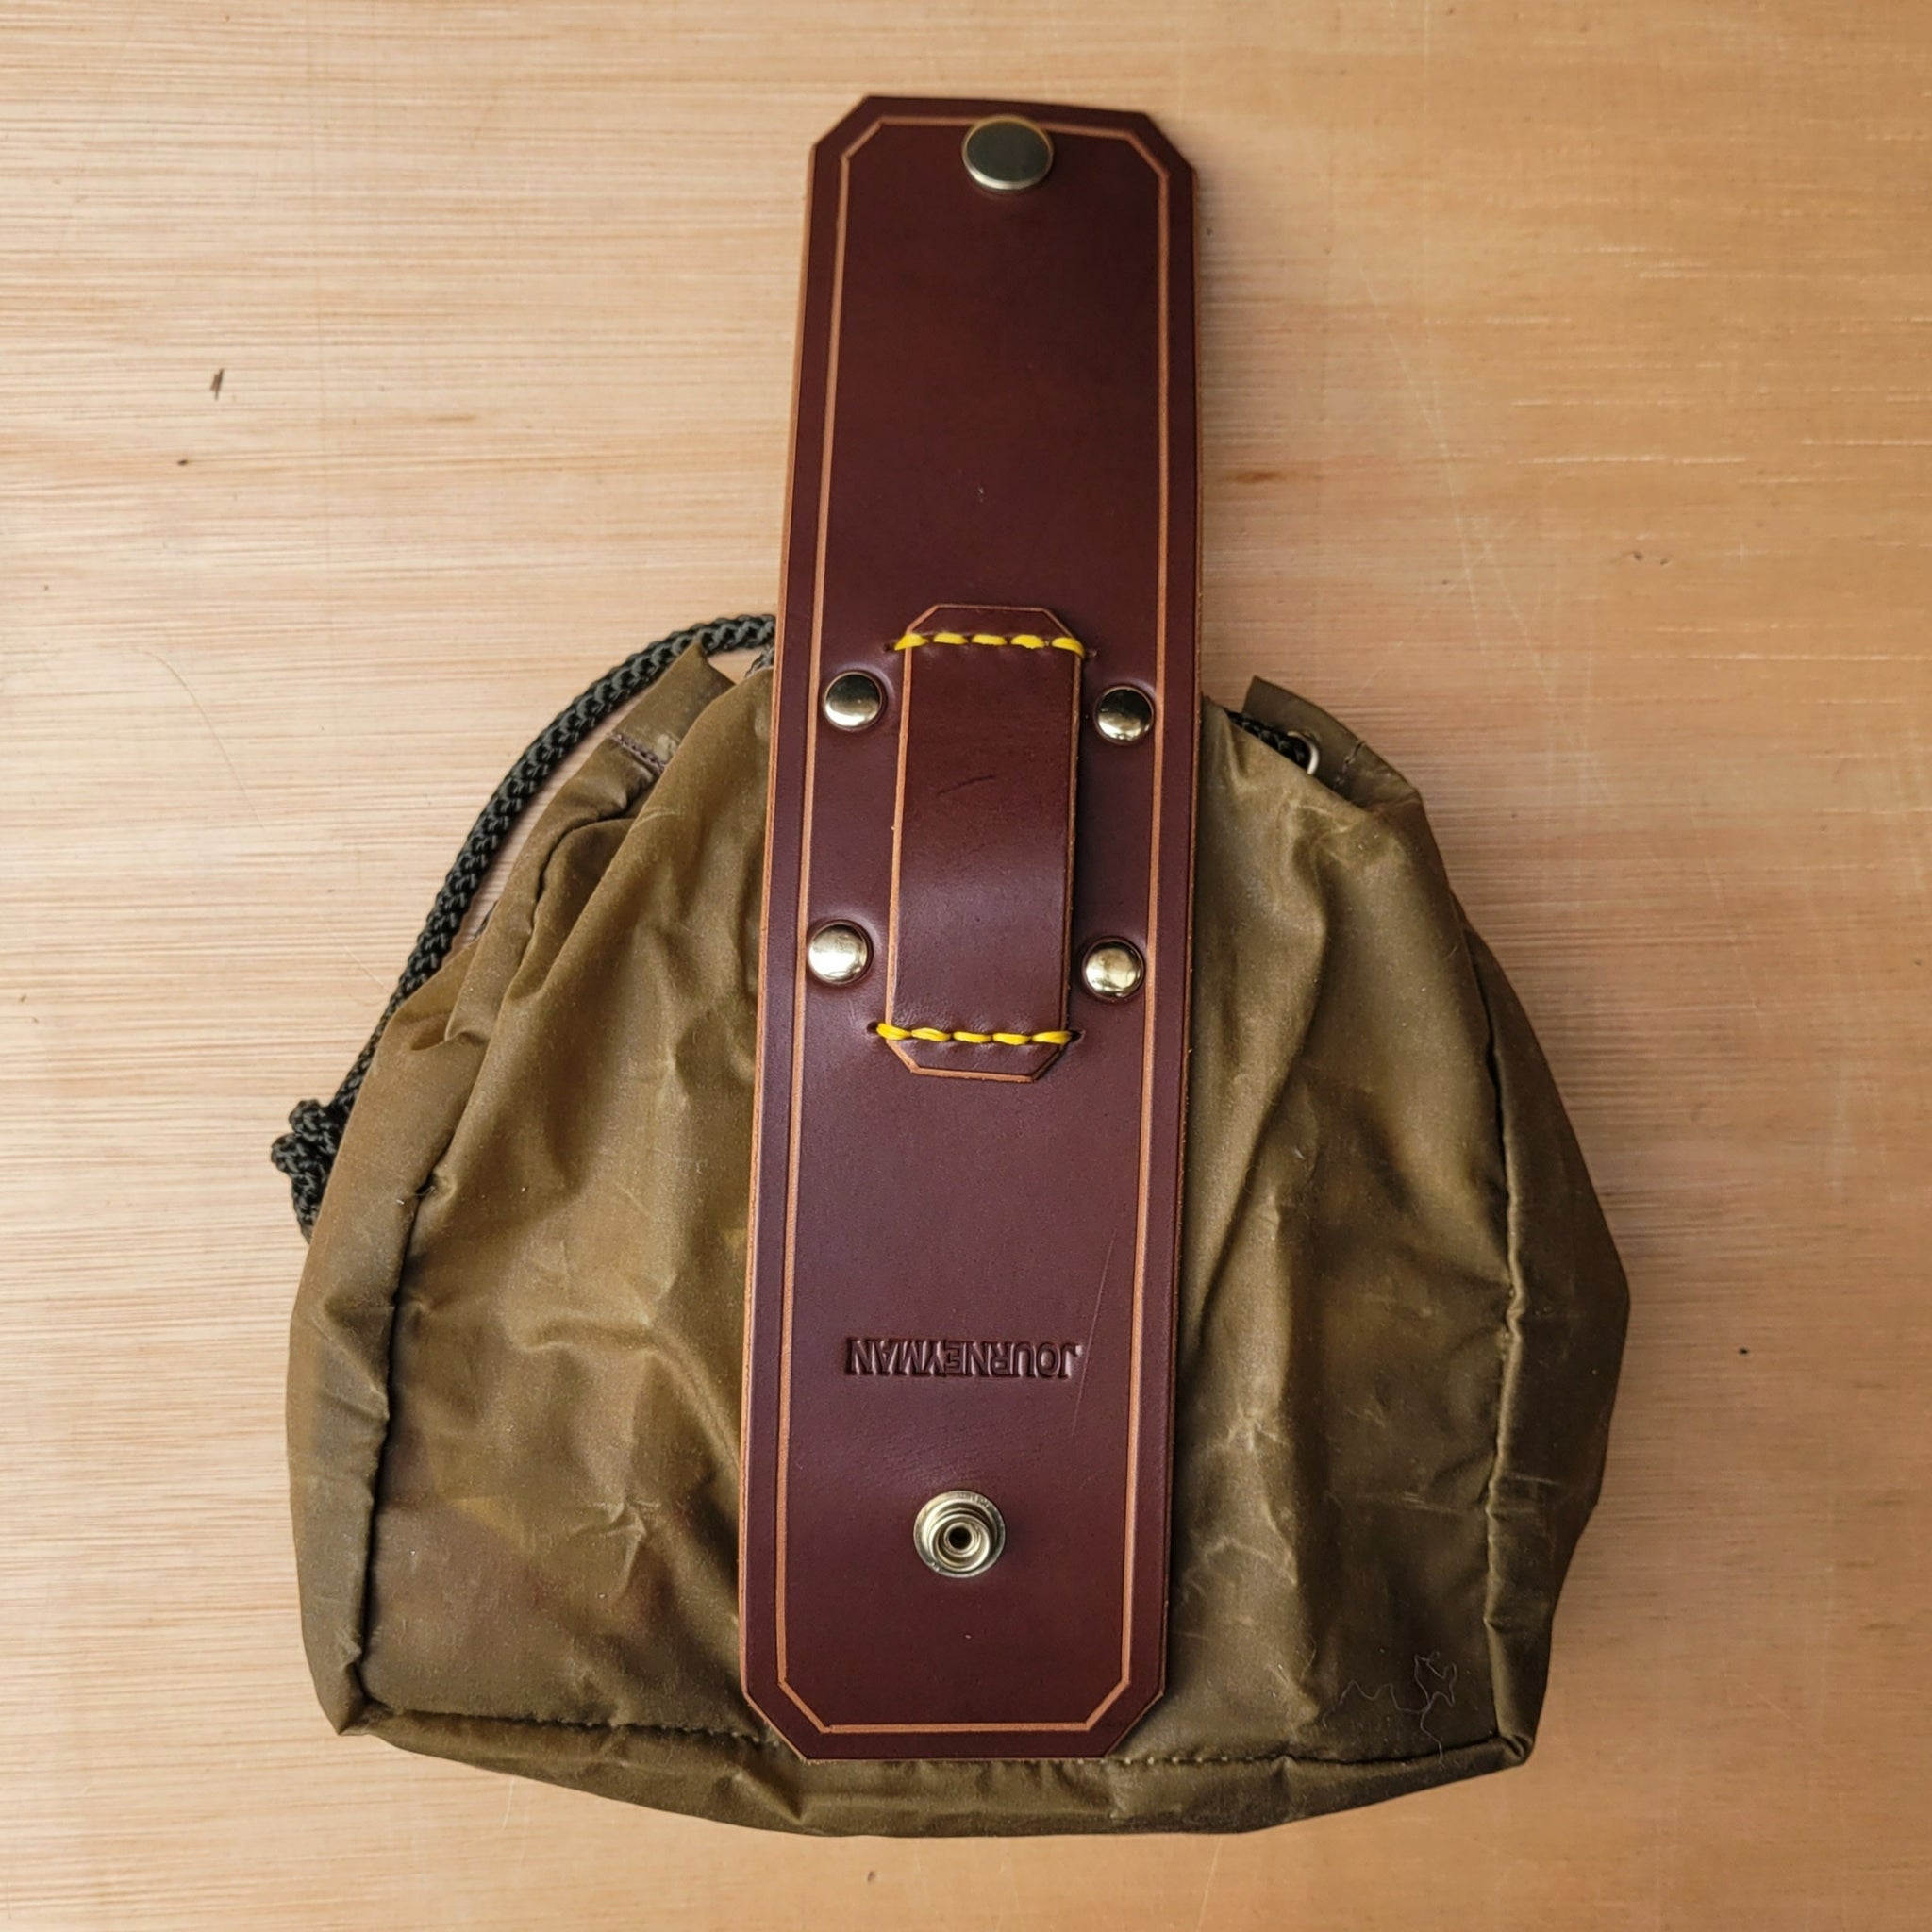 Forager dump pouch made from wax canvas and leather, used for foraging in the woods